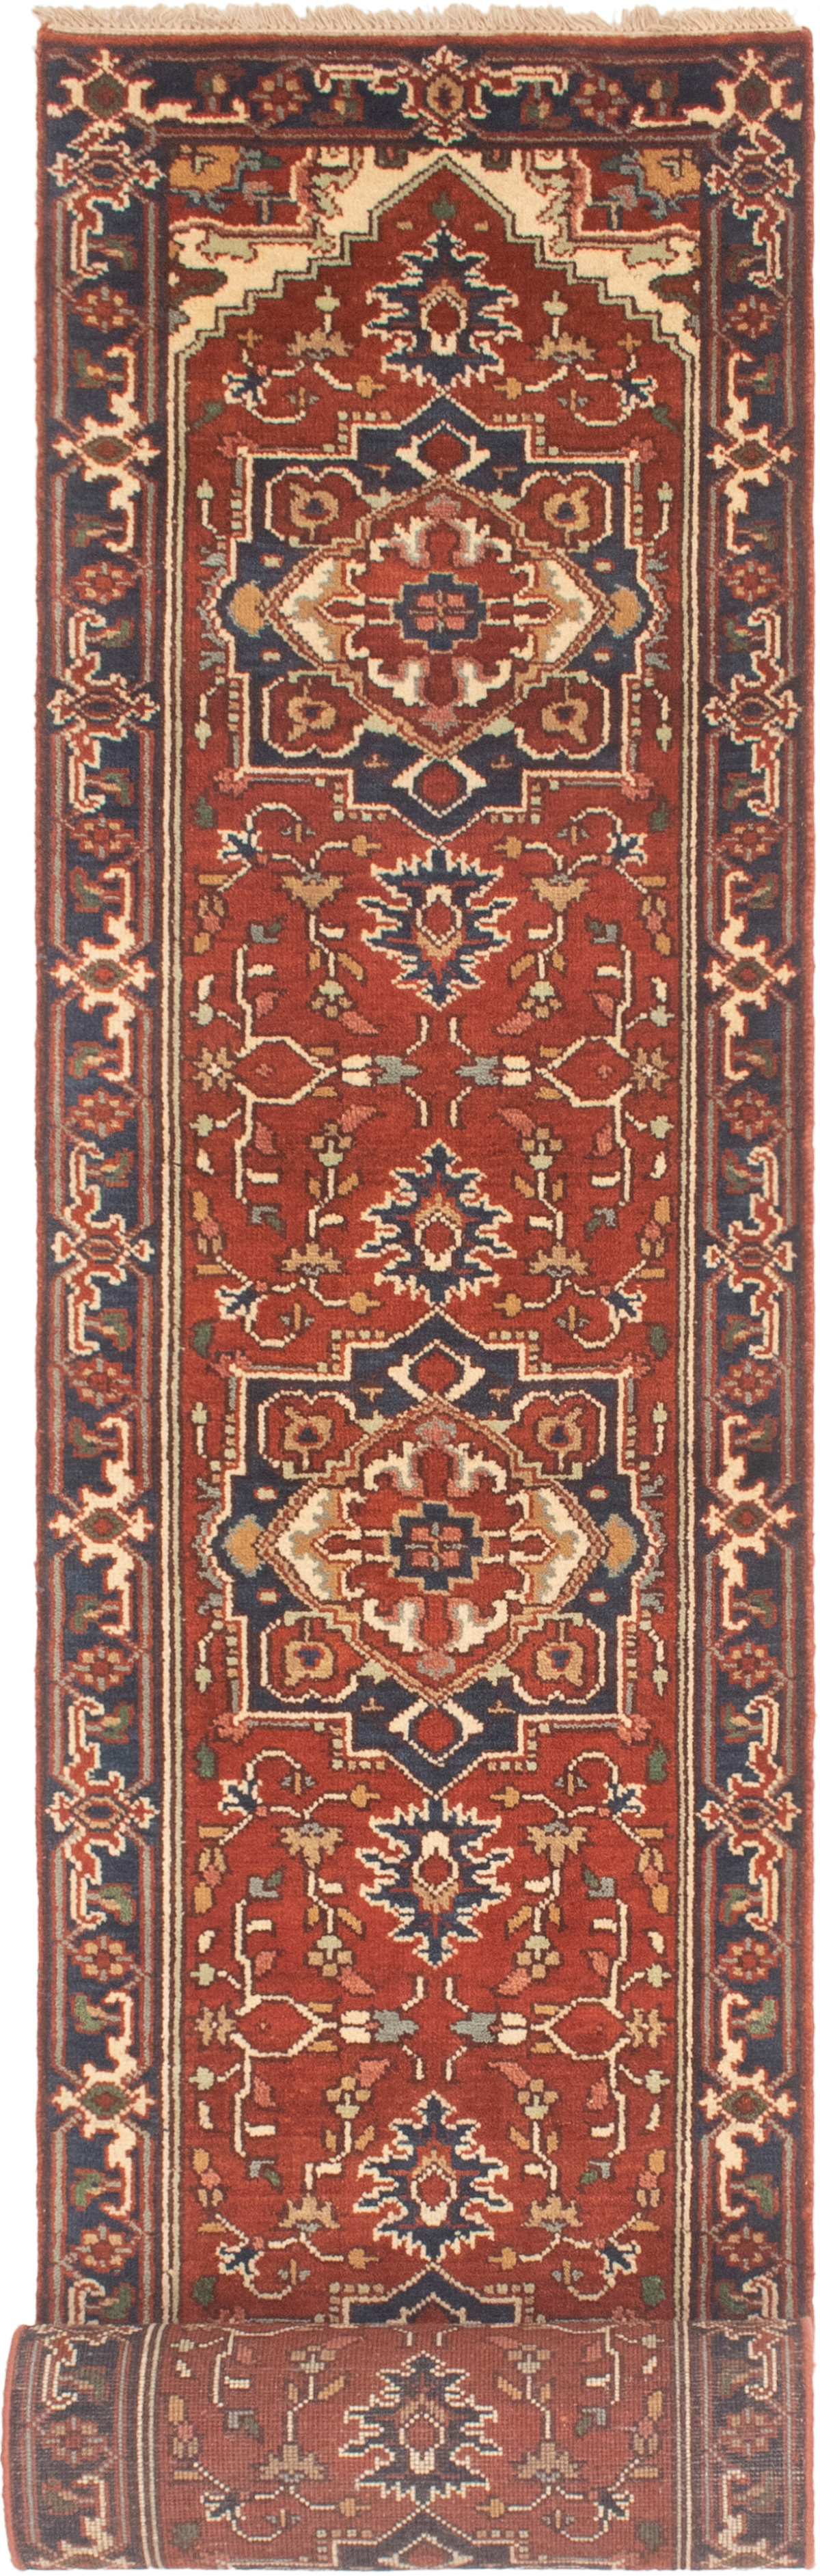 Hand-knotted Serapi Heritage Dark Copper Wool Rug 2'6" x 19'10"  Size: 2'6" x 19'10"  